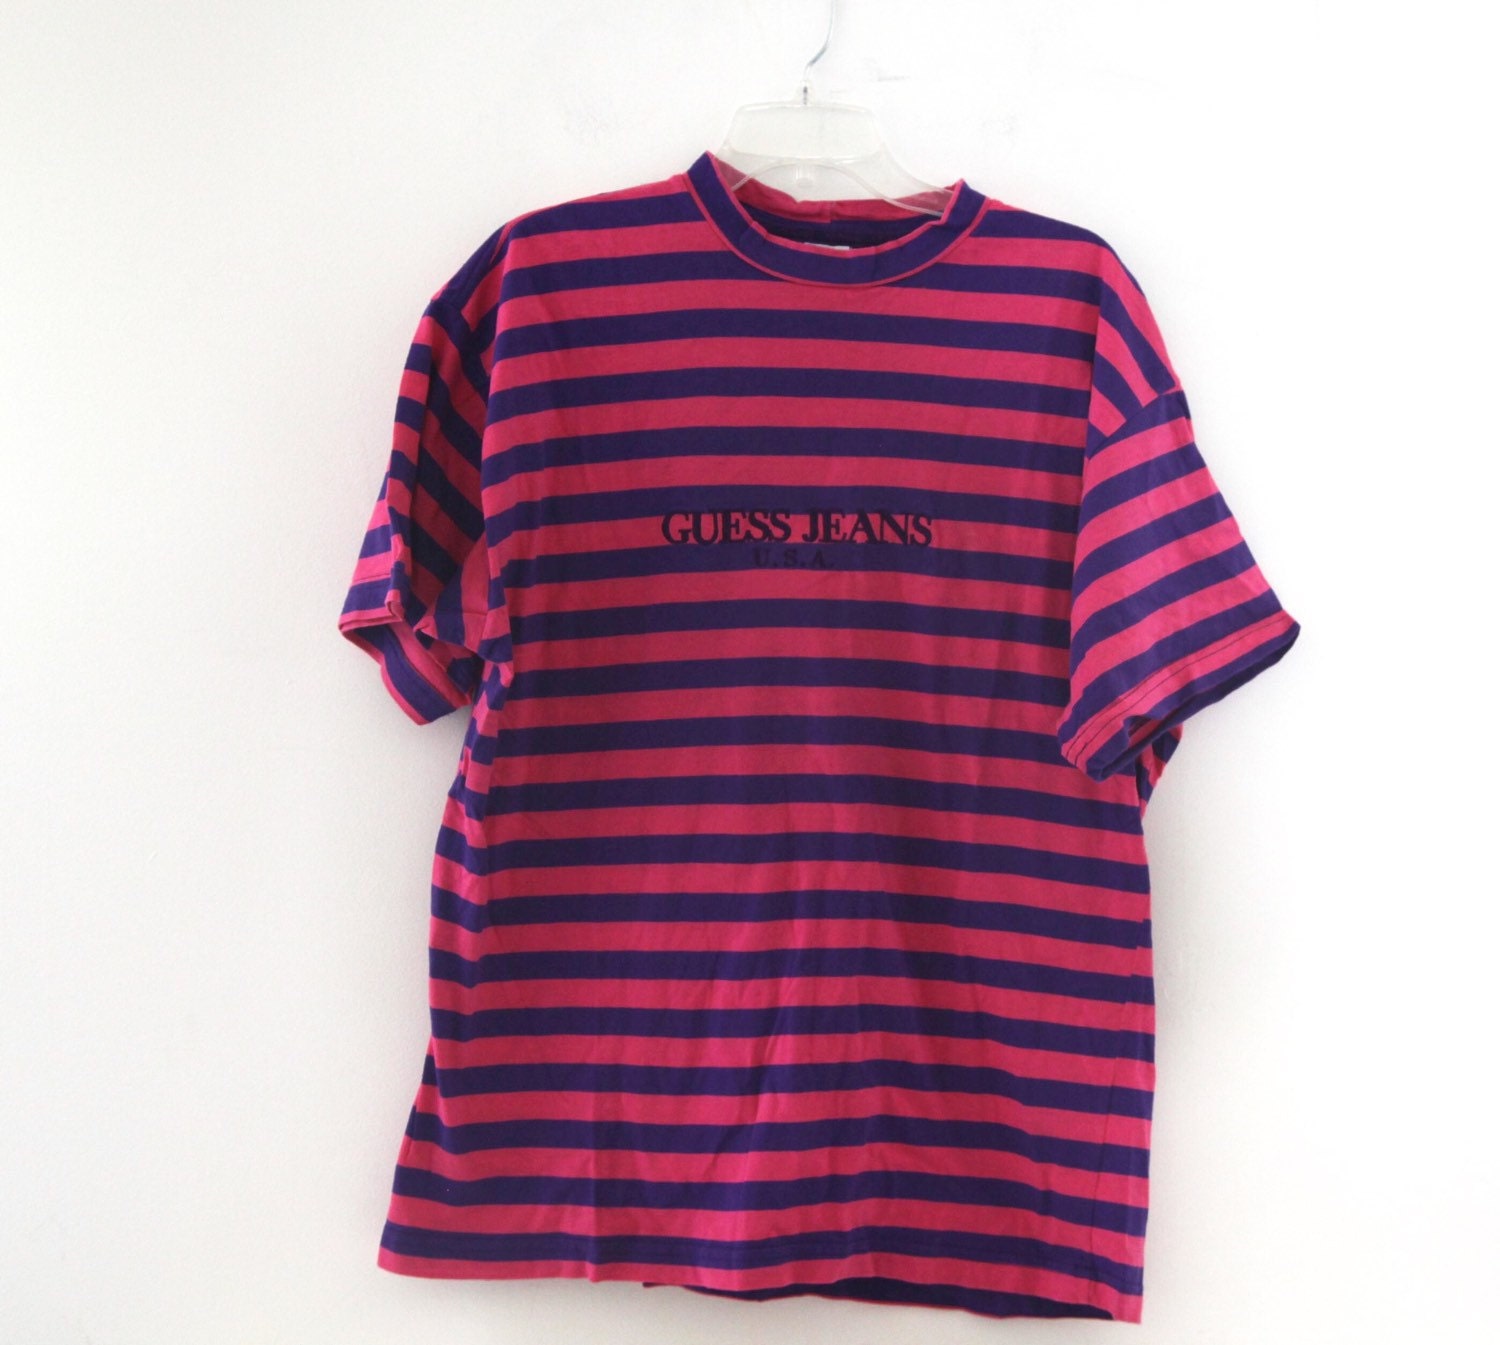 Vintage 80s 90s Guess Jeans striped tshirt pink and purple